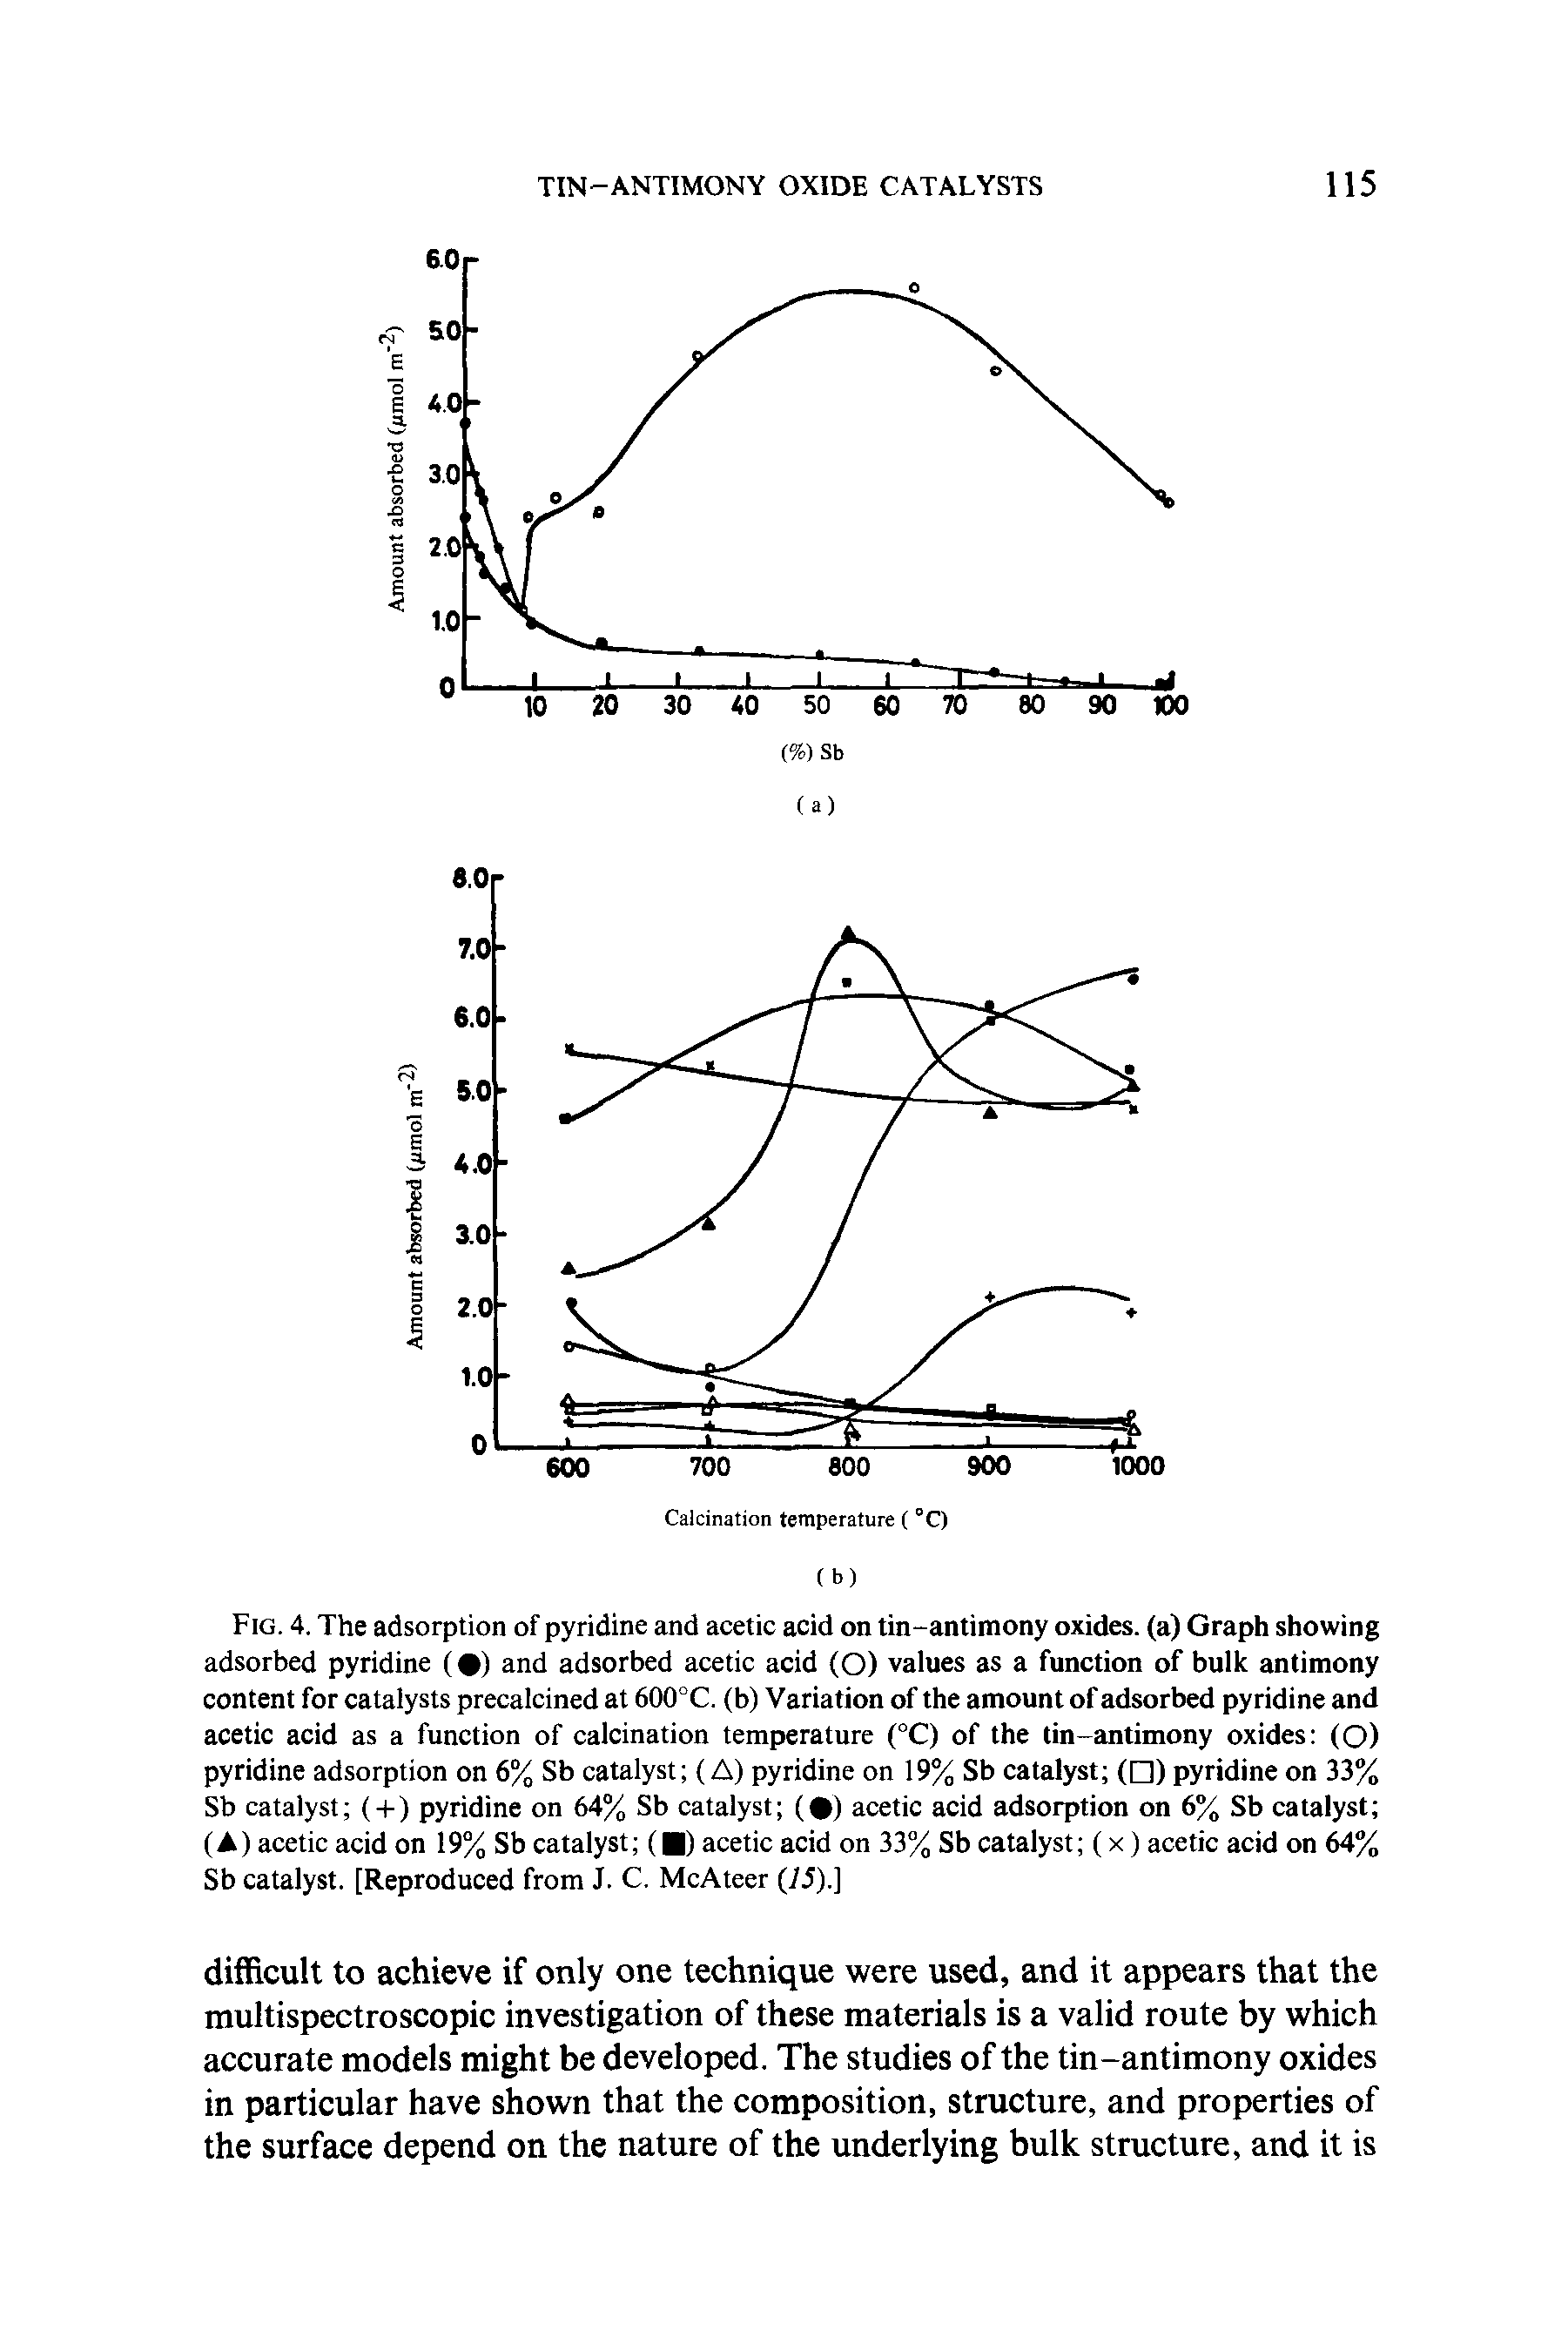 Fig. 4. The adsorption of pyridine and acetic acid on tin-antimony oxides, (a) Graph showing adsorbed pyridine ( ) and adsorbed acetic acid (O) values as a function of bulk antimony content for catalysts precalcined at 600°C. (b) Variation of the amount of adsorbed pyridine and acetic acid as a function of calcination temperature (°C) of the tin-antimony oxides (O) pyridine adsorption on 6% Sb catalyst (A) pyridine on 19% Sb catalyst ( ) pyridine on 33% Sb catalyst ( + ) pyridine on 64% Sb catalyst ( ) acetic acid adsorption on 6% Sb catalyst (A) acetic acid on 19% Sb catalyst ( ) acetic acid on 33% Sb catalyst (x) acetic acid on 64% Sb catalyst. [Reproduced from J. C. McAteer (7J).]...